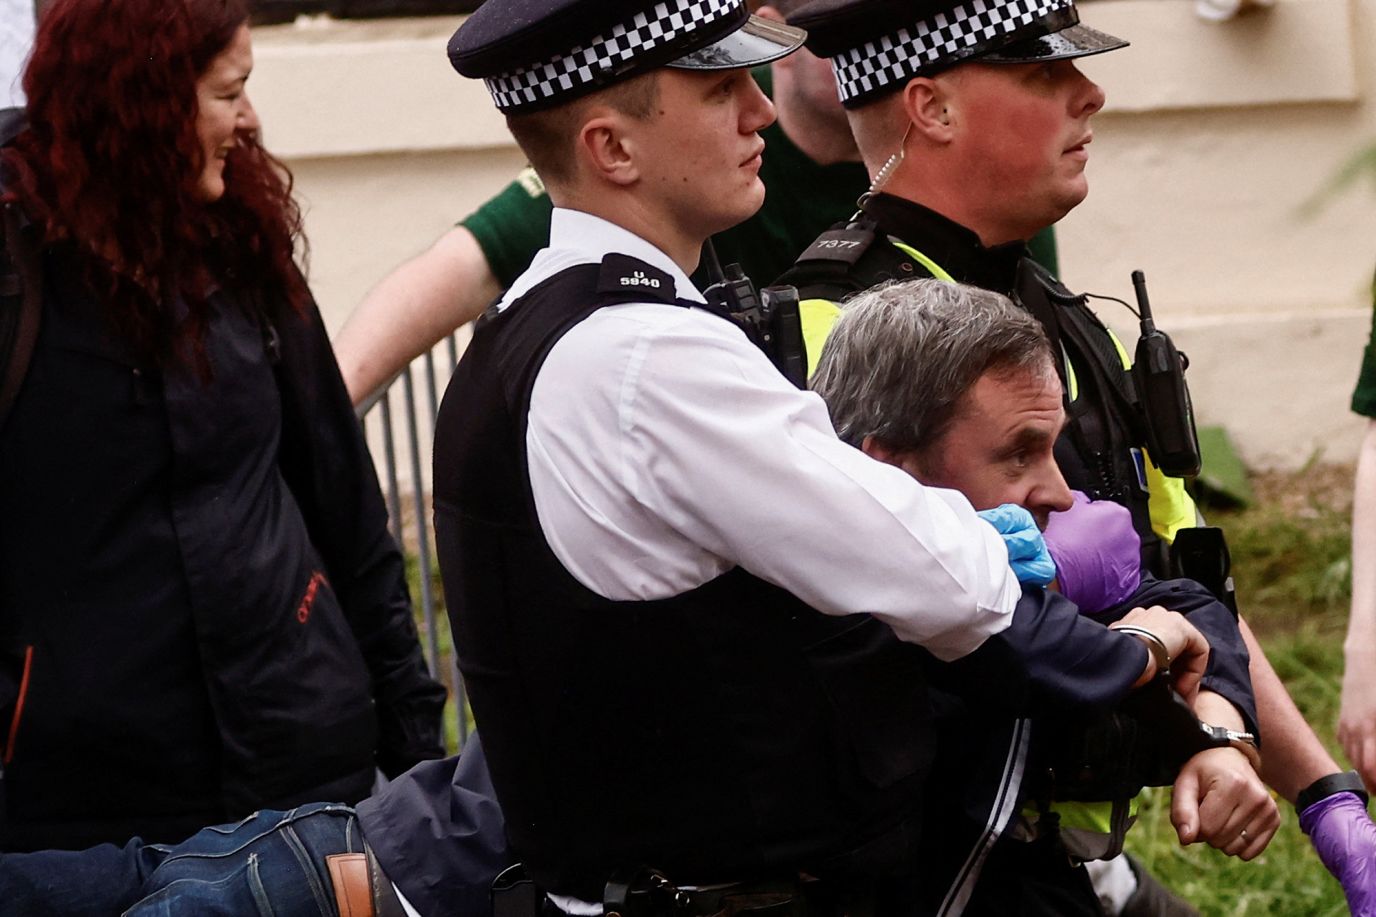 Police officers detain a protester ahead of the King's procession. <a href='https://www.cnn.com/uk/live-news/king-charles-iii-coronation-ckc-intl-gbr/h_089ce3083553388e9051d6c7fd26c7b0' target='_blank'>Several arrests were made Saturday</a> as protesters gathered near the procession route.